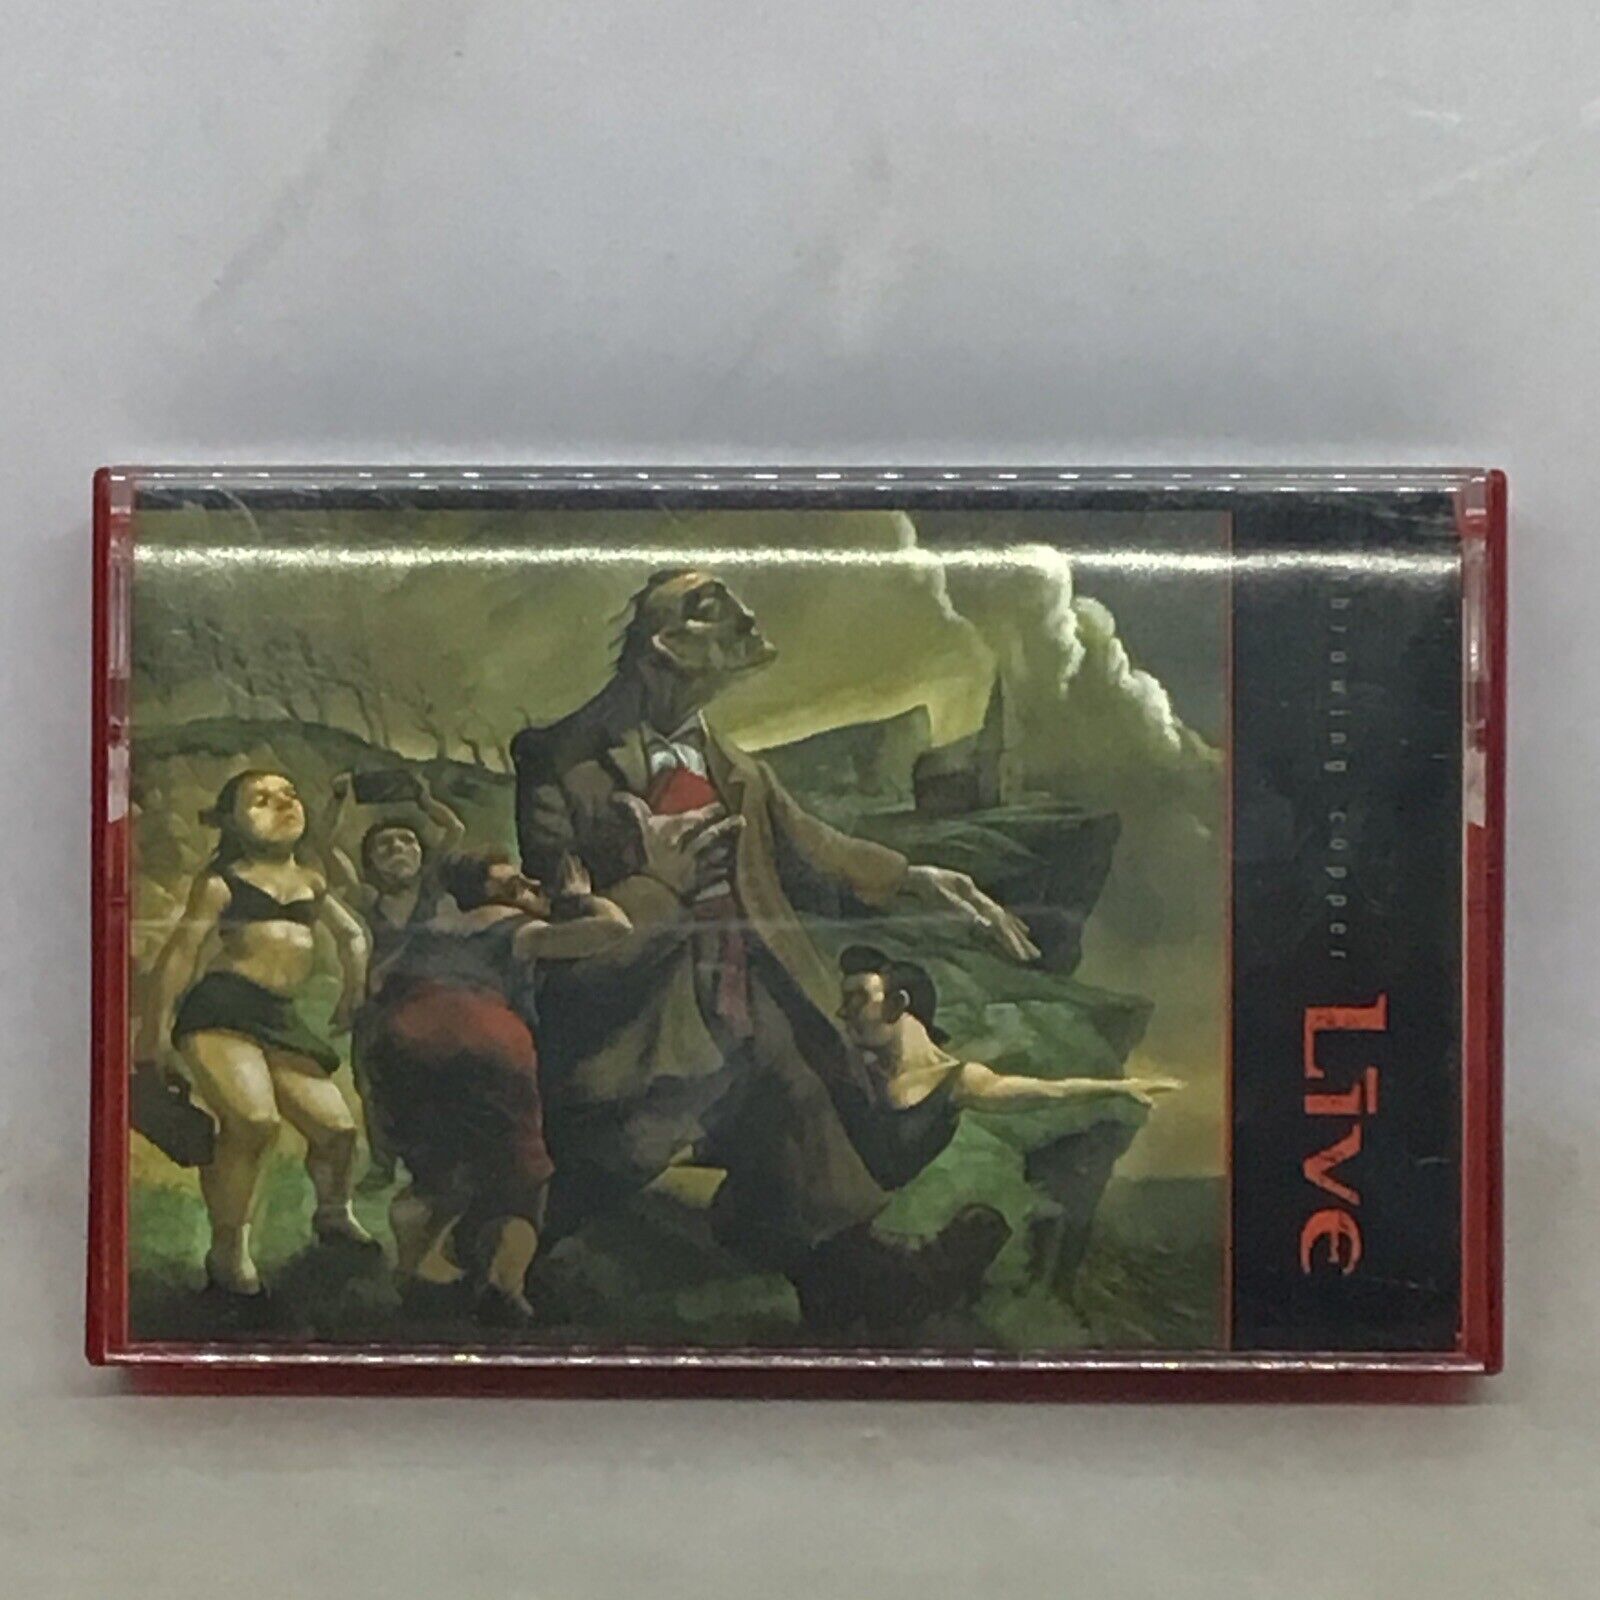 Vintage 1994 Throwing Copper by Live Cassette Tape Radioactive Records